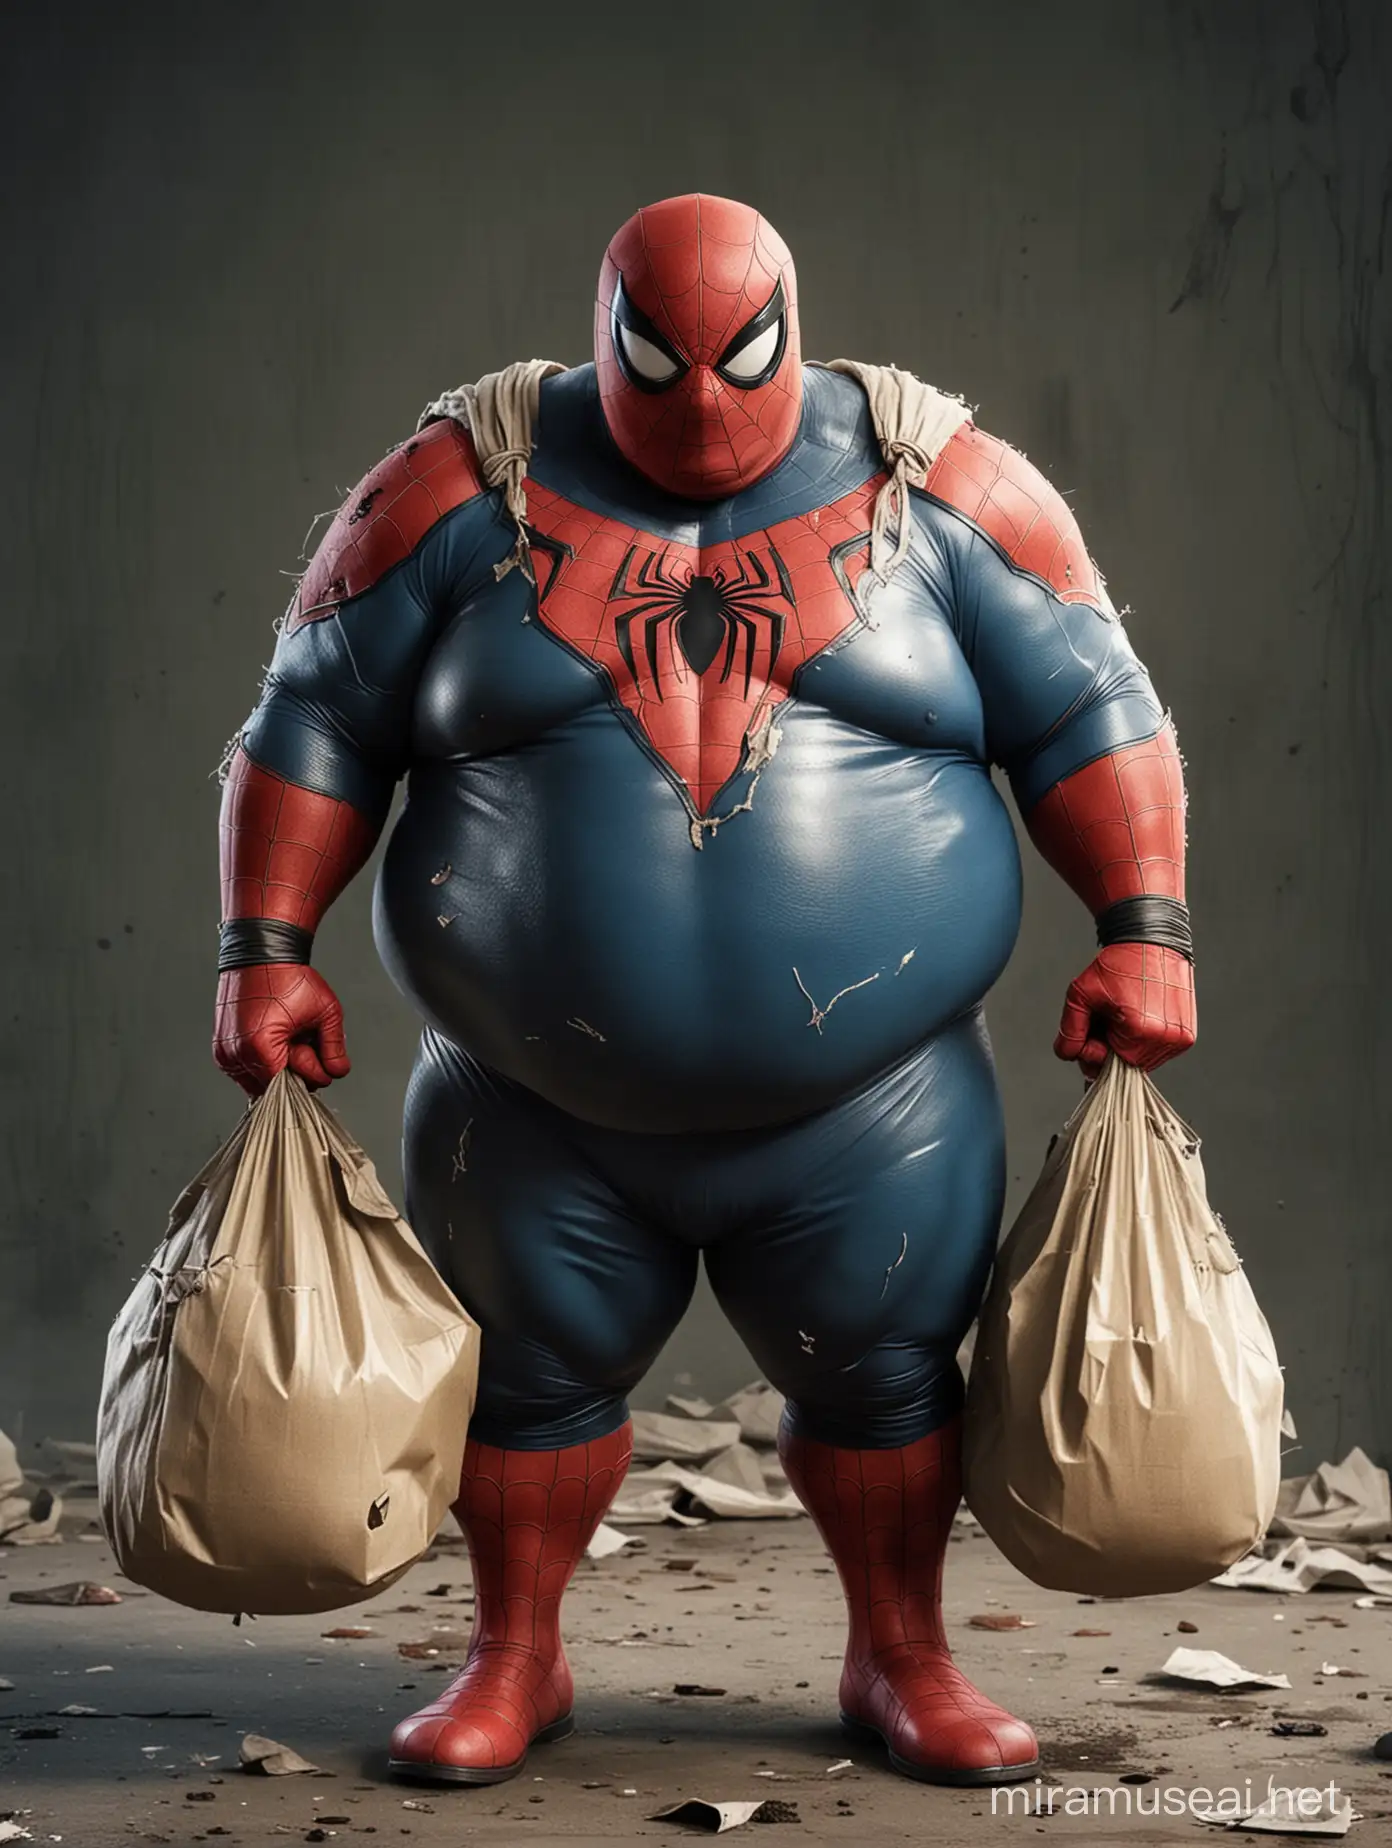 fat spider-man in a torn suit, with bags in his hands